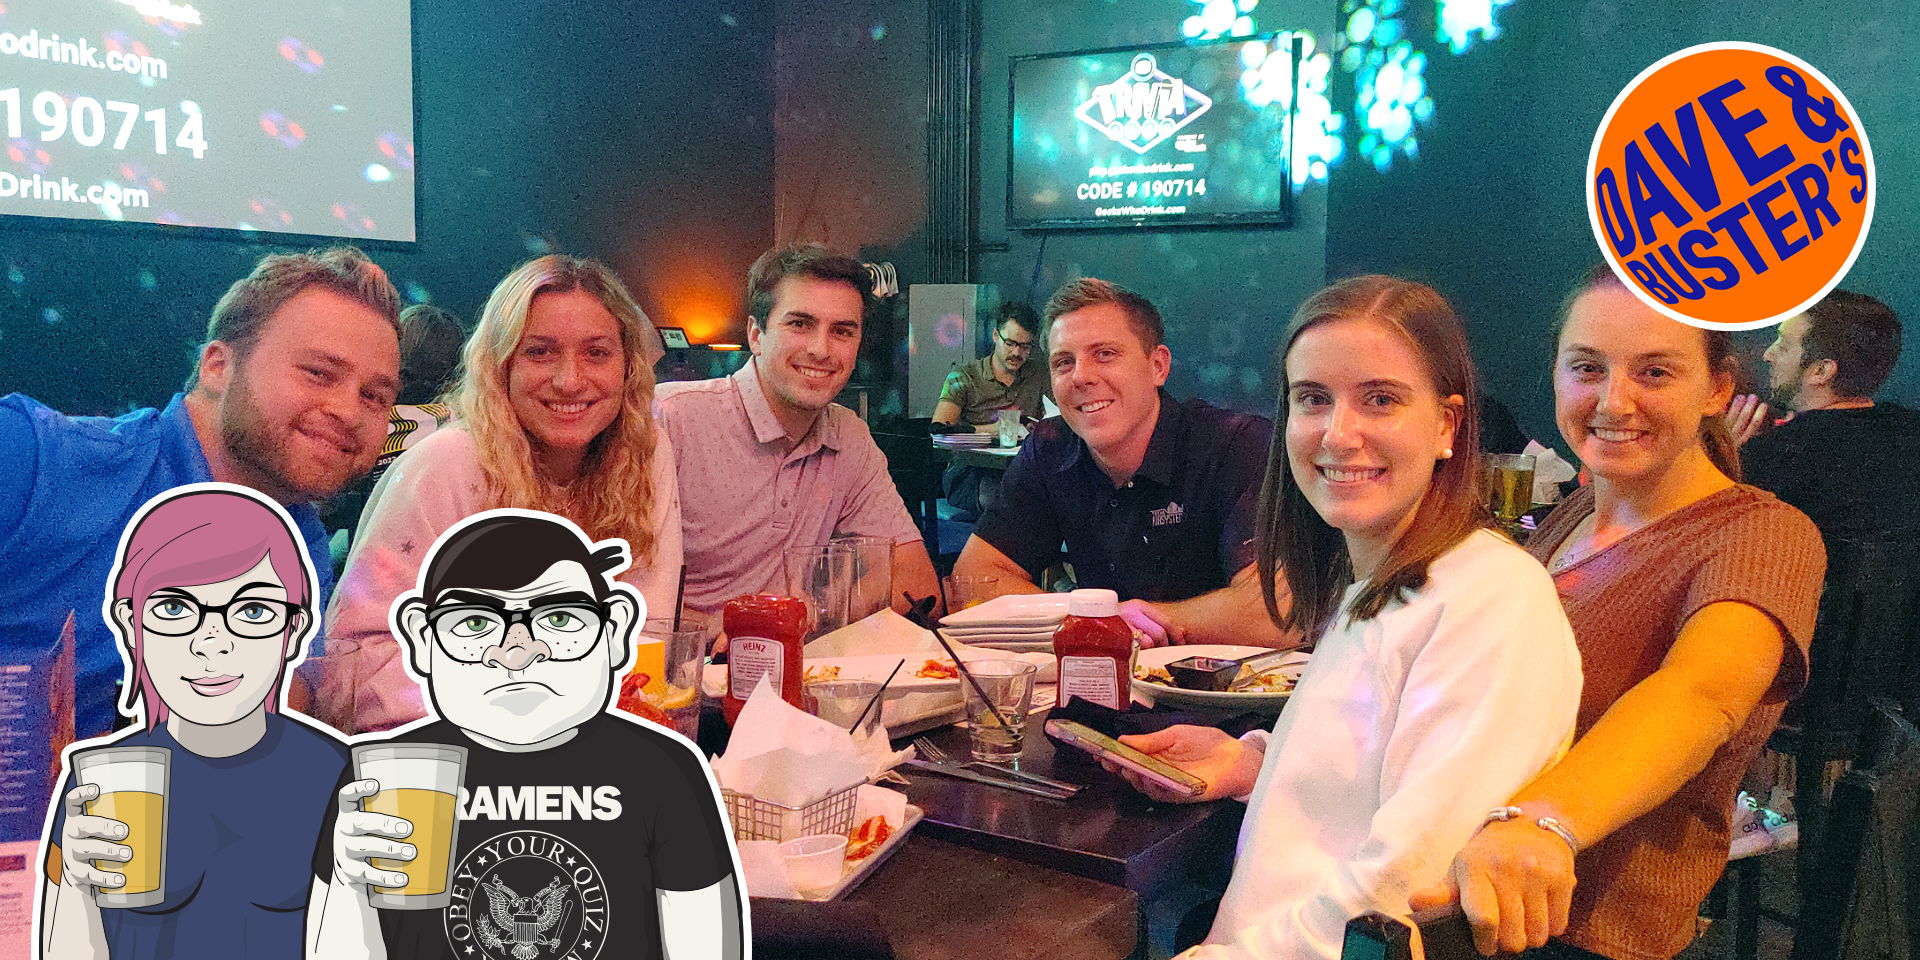 Geeks Who Drink Trivia Night at Dave & Buster's - Dallas promotional image